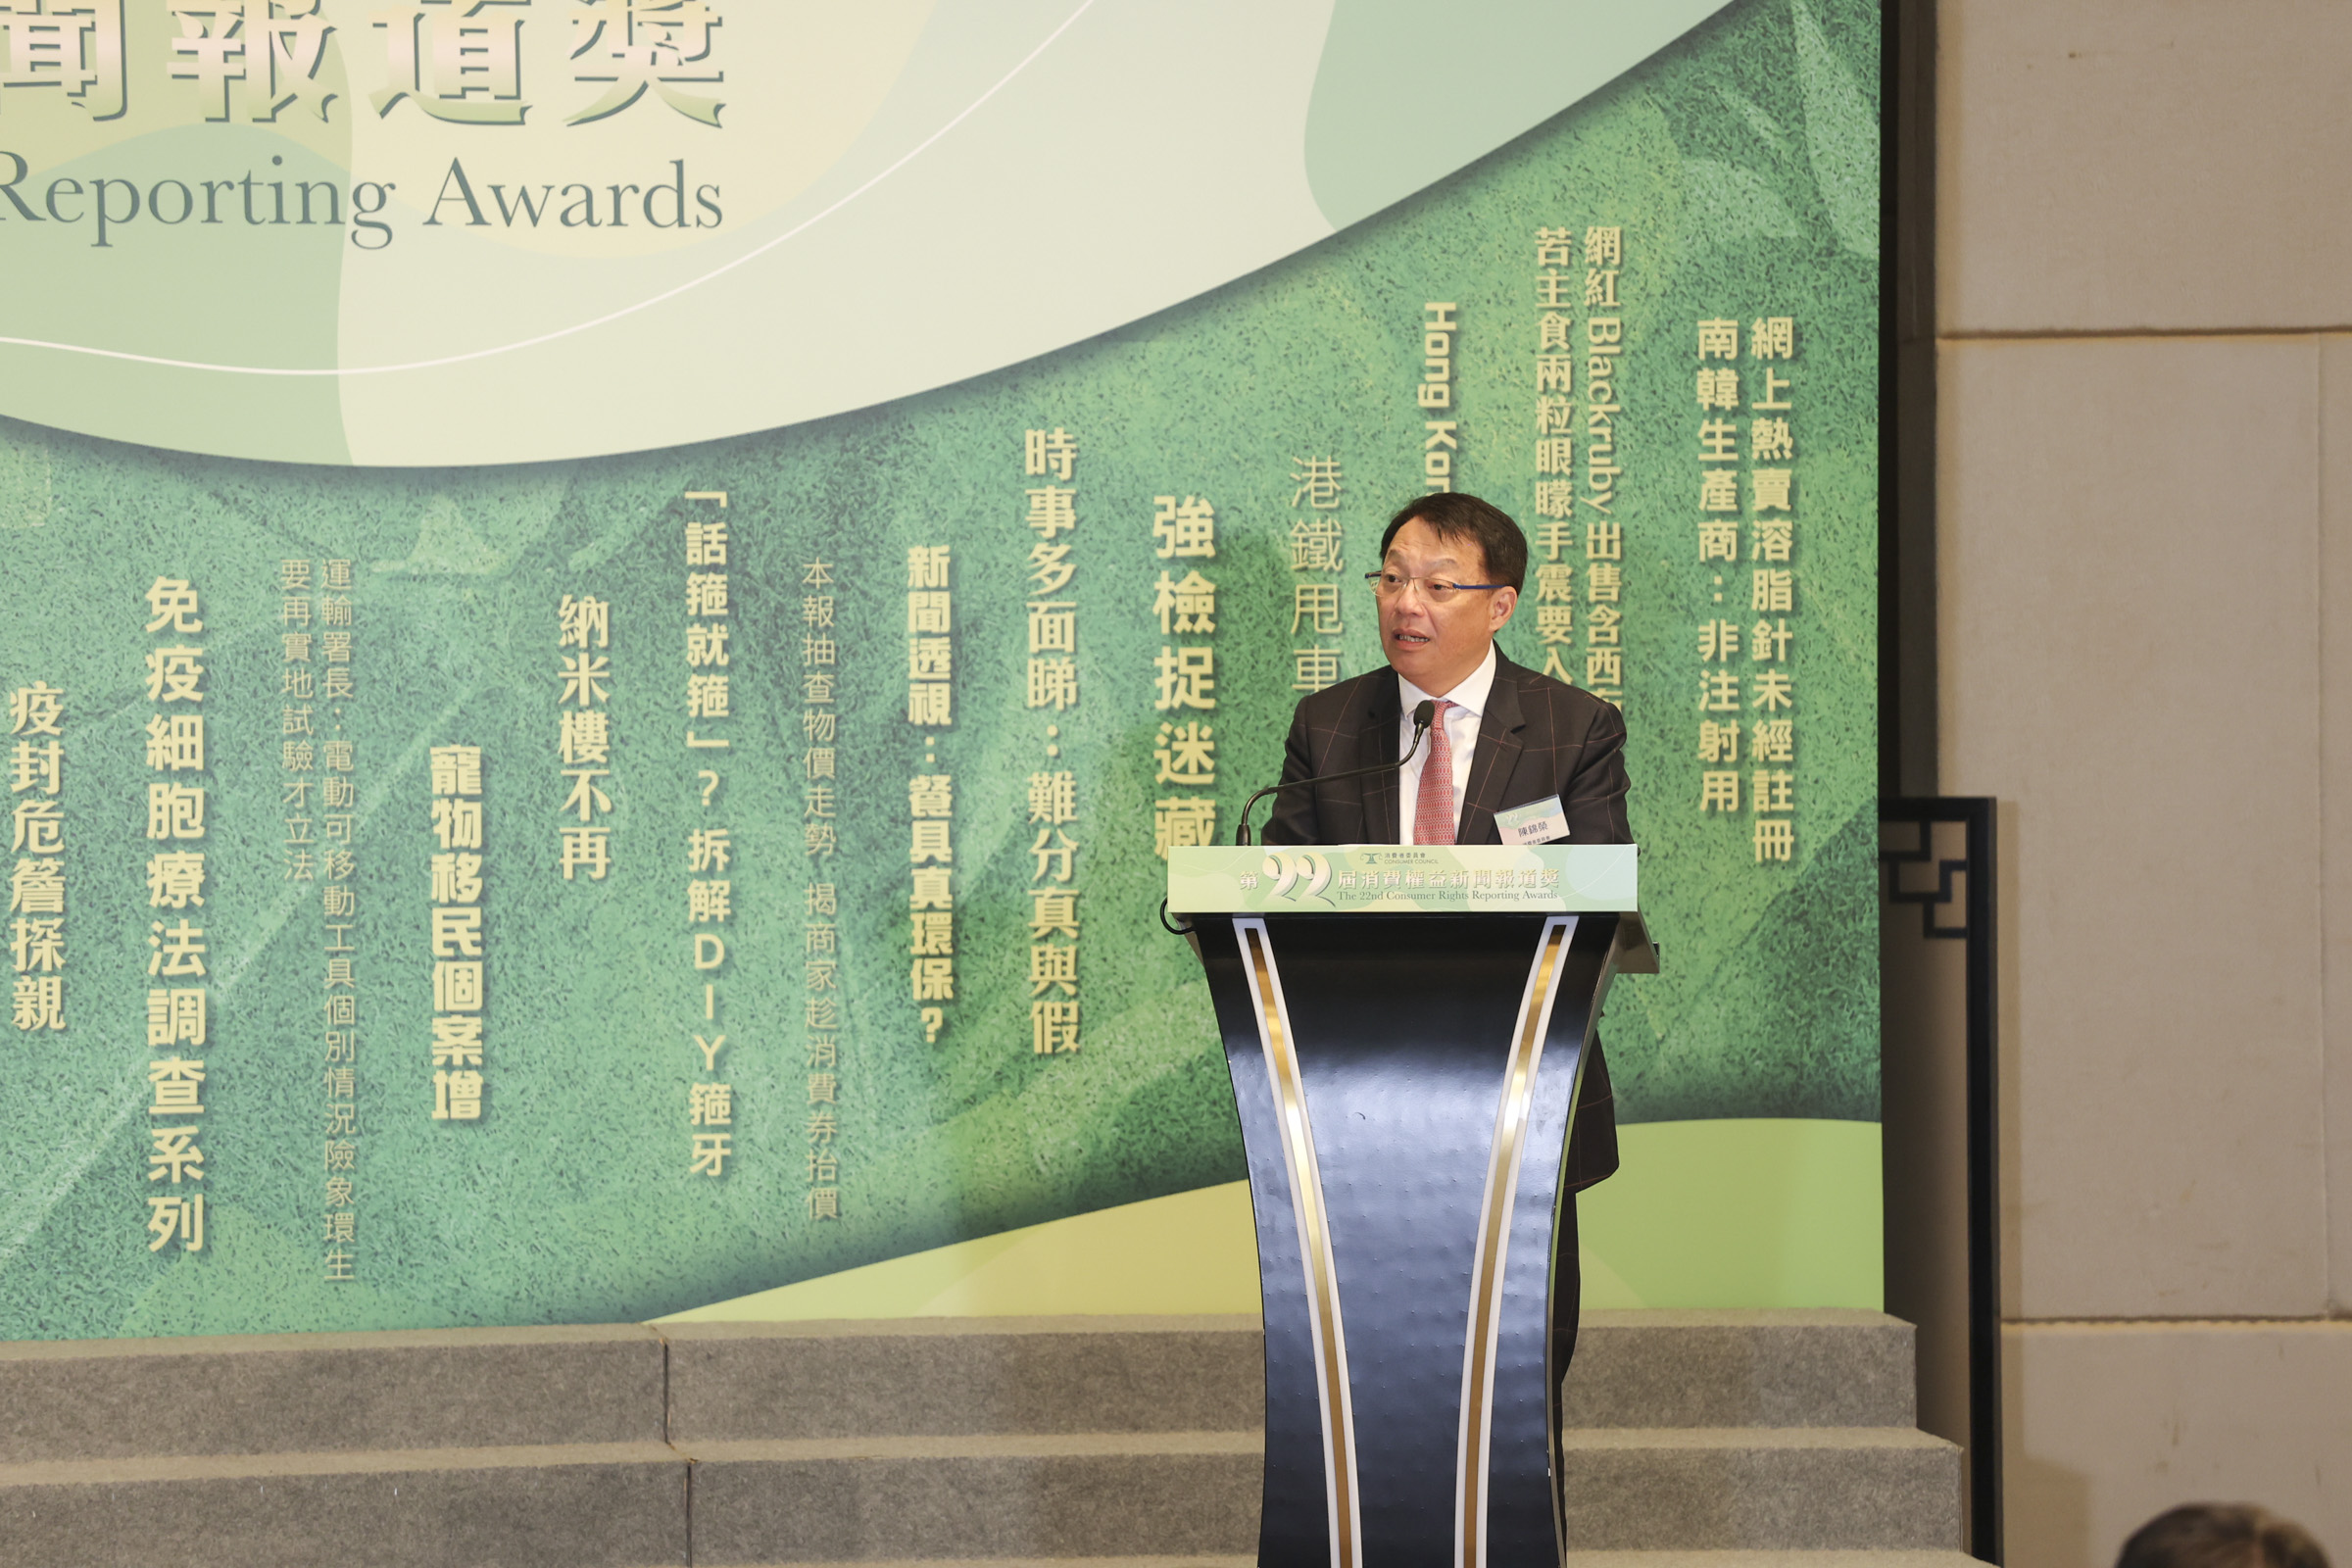 Mr Clement Chan Kam-wing, Chairman of the Consumer Council, presents the welcome speech.